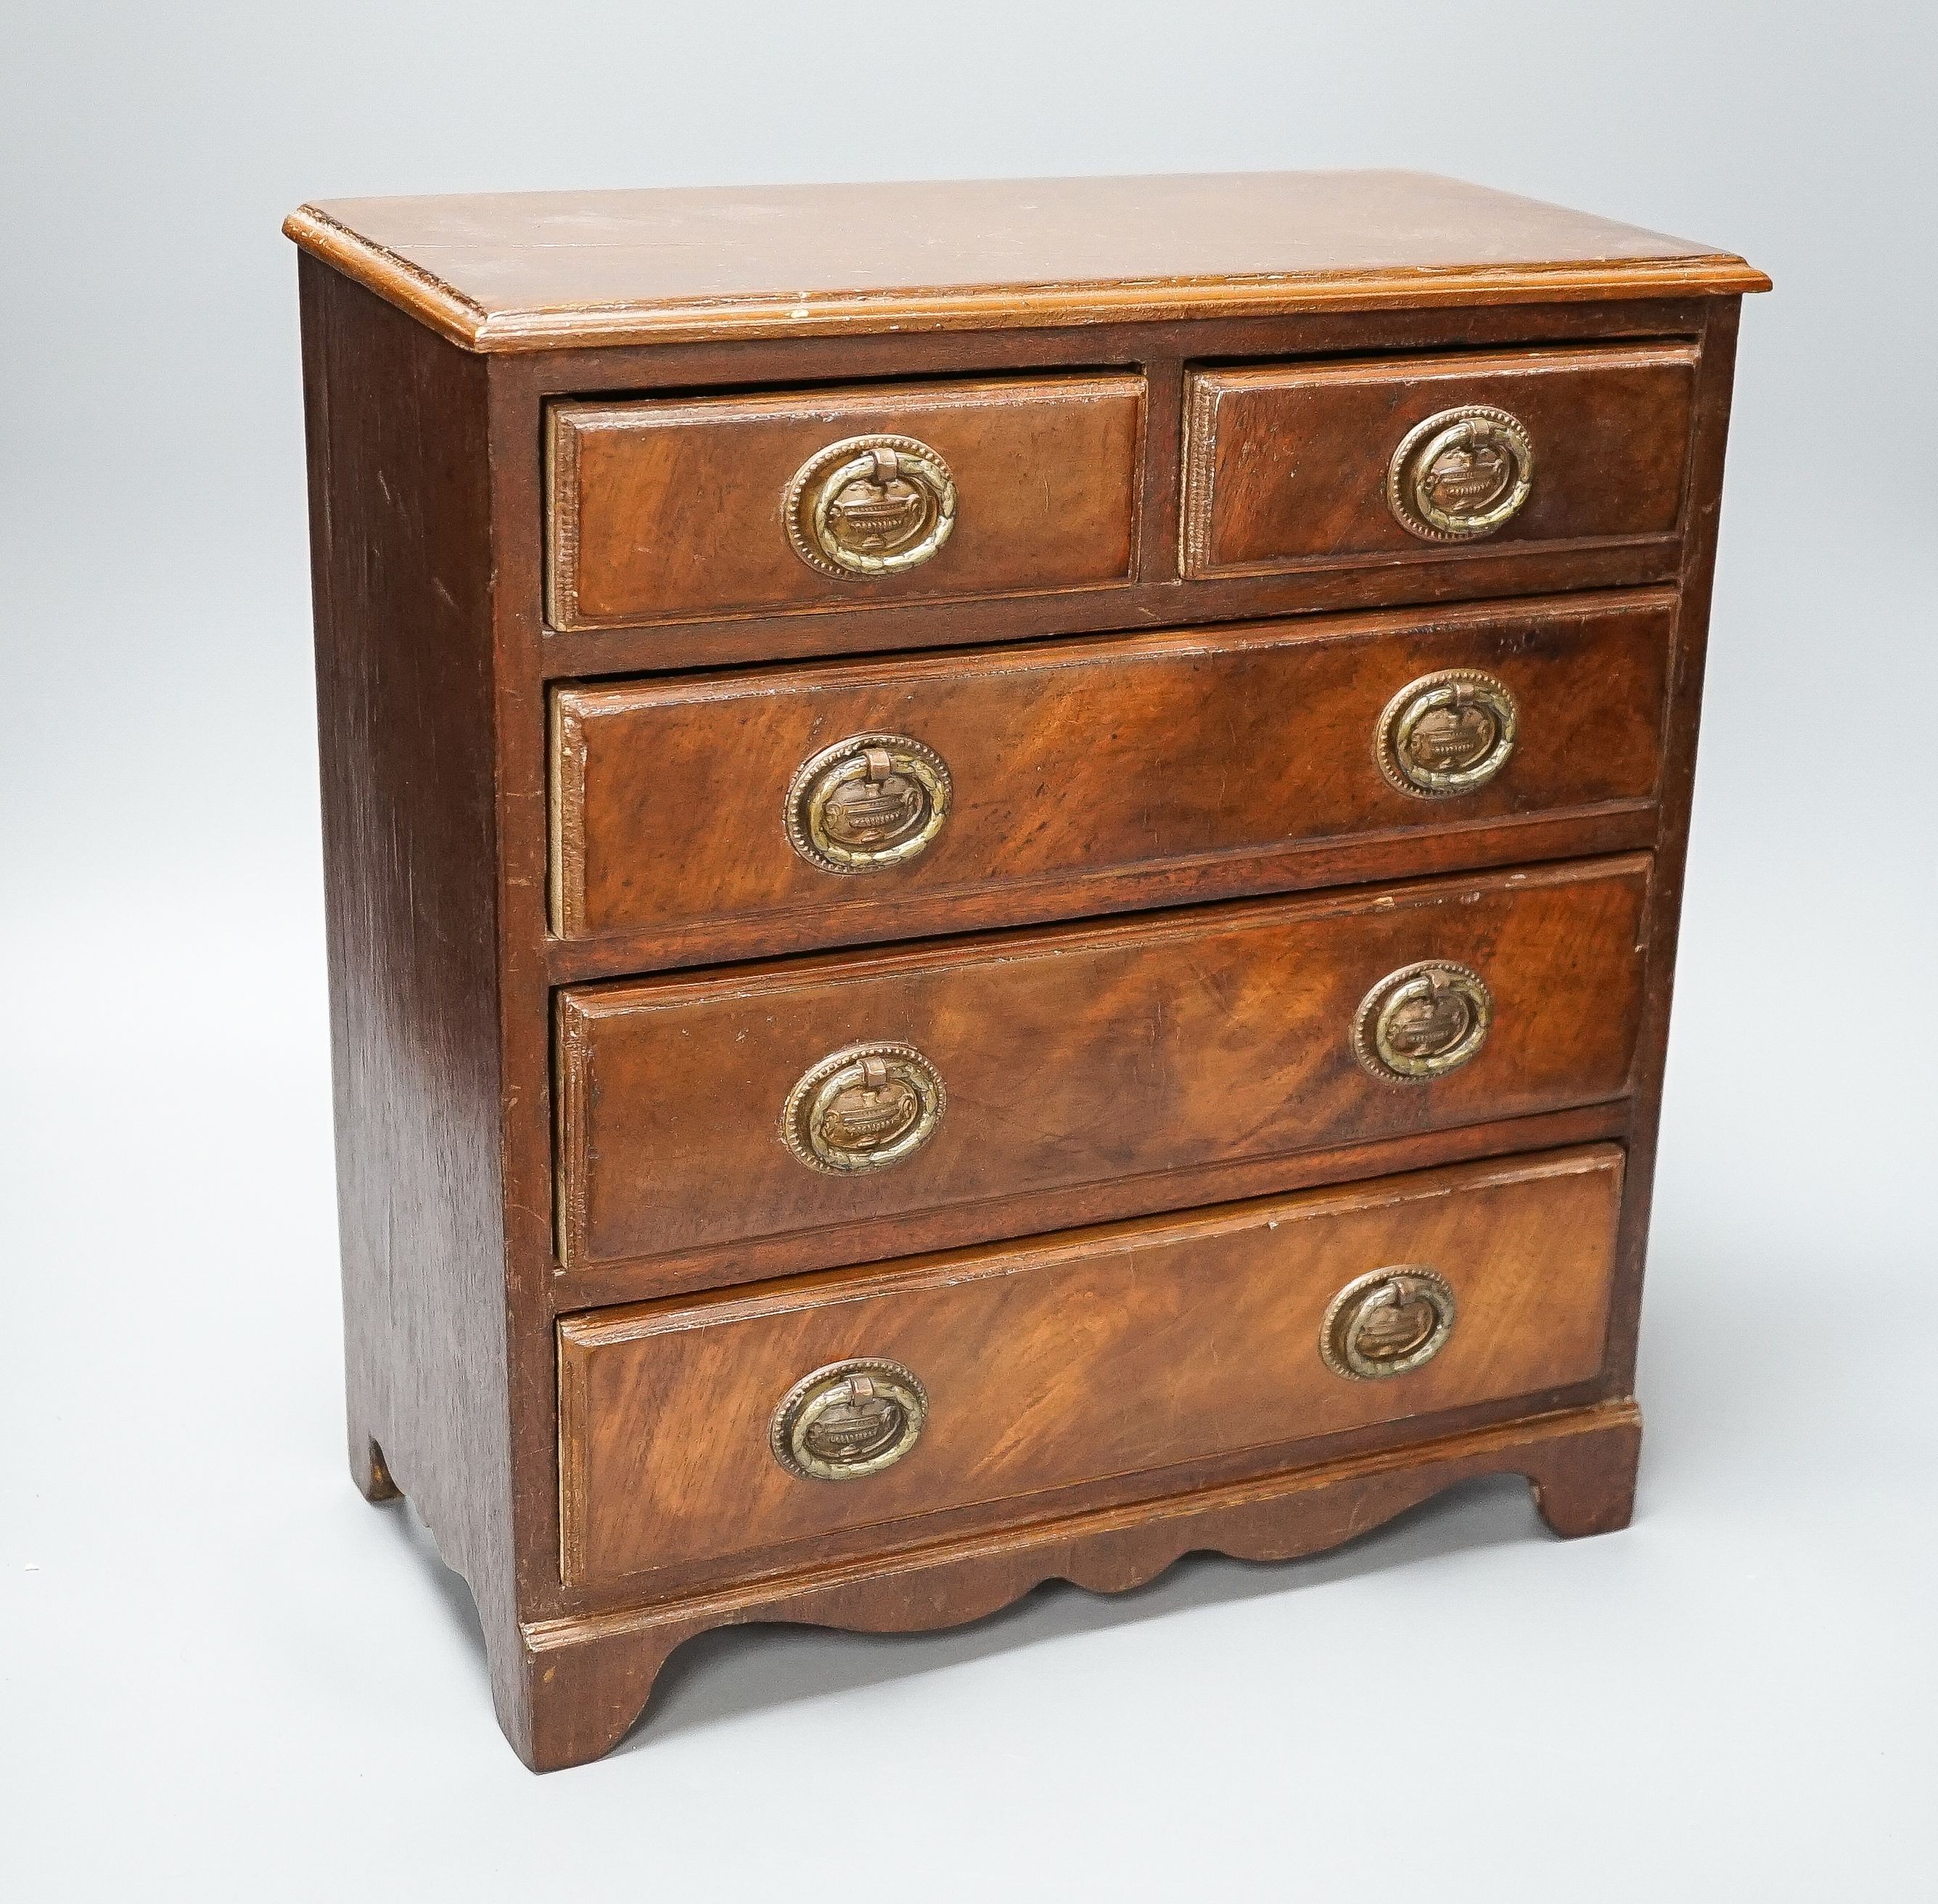 A 19th century mahogany miniature chest of drawers 35cm high, 33cm wide